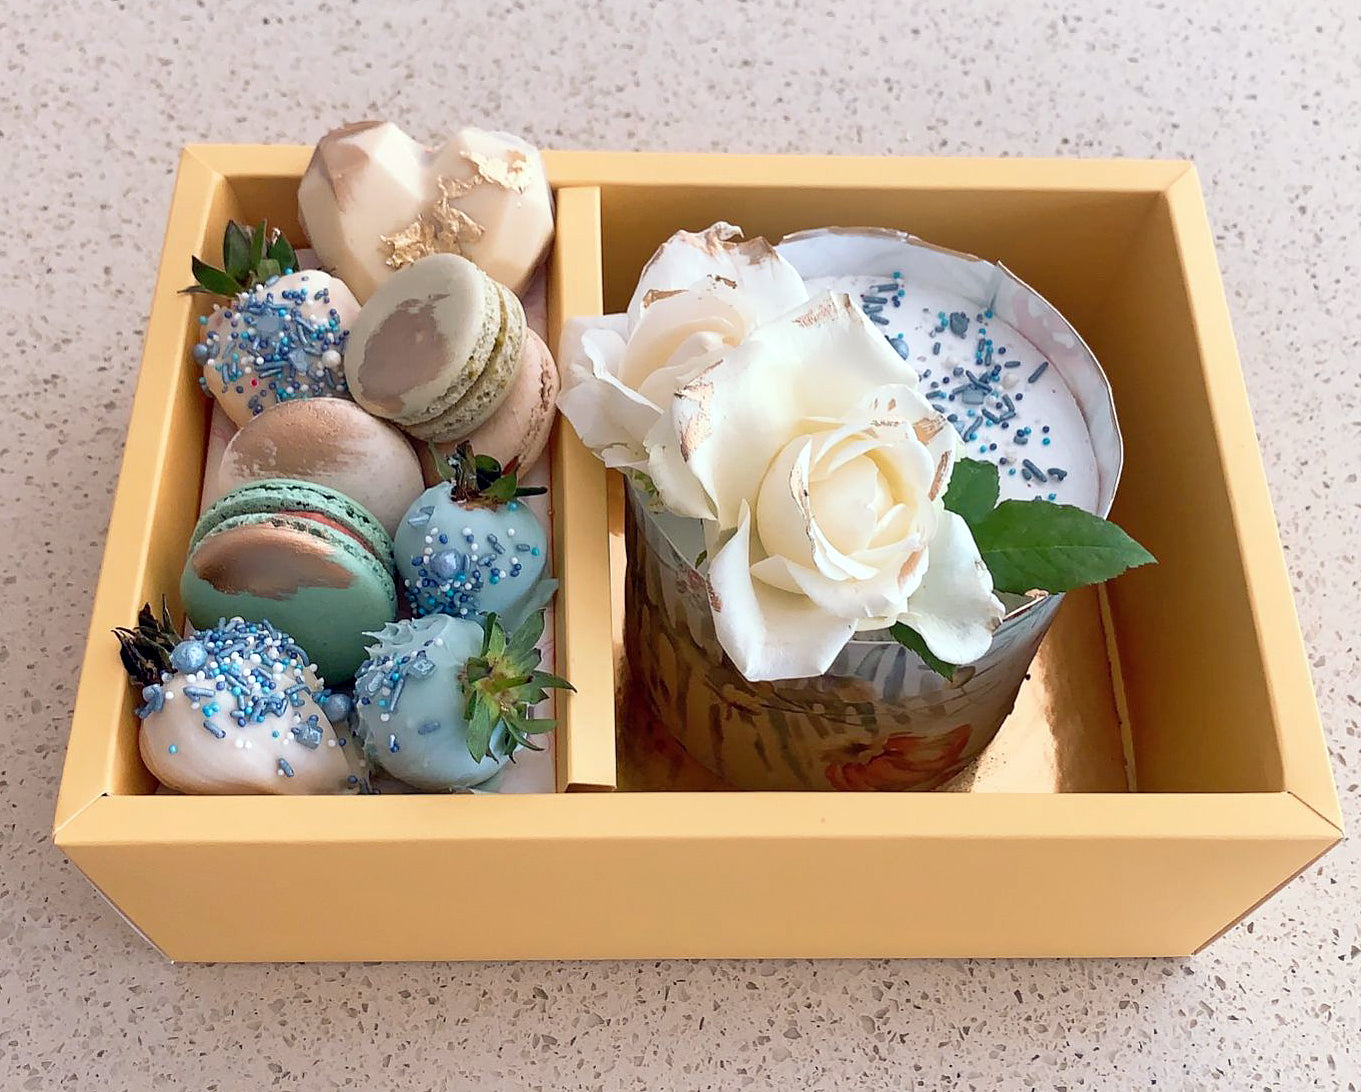 Mothers-Day-Treat-Box-with-Mini-Cake-Blue-DodoMarket-delivery-Mauritius